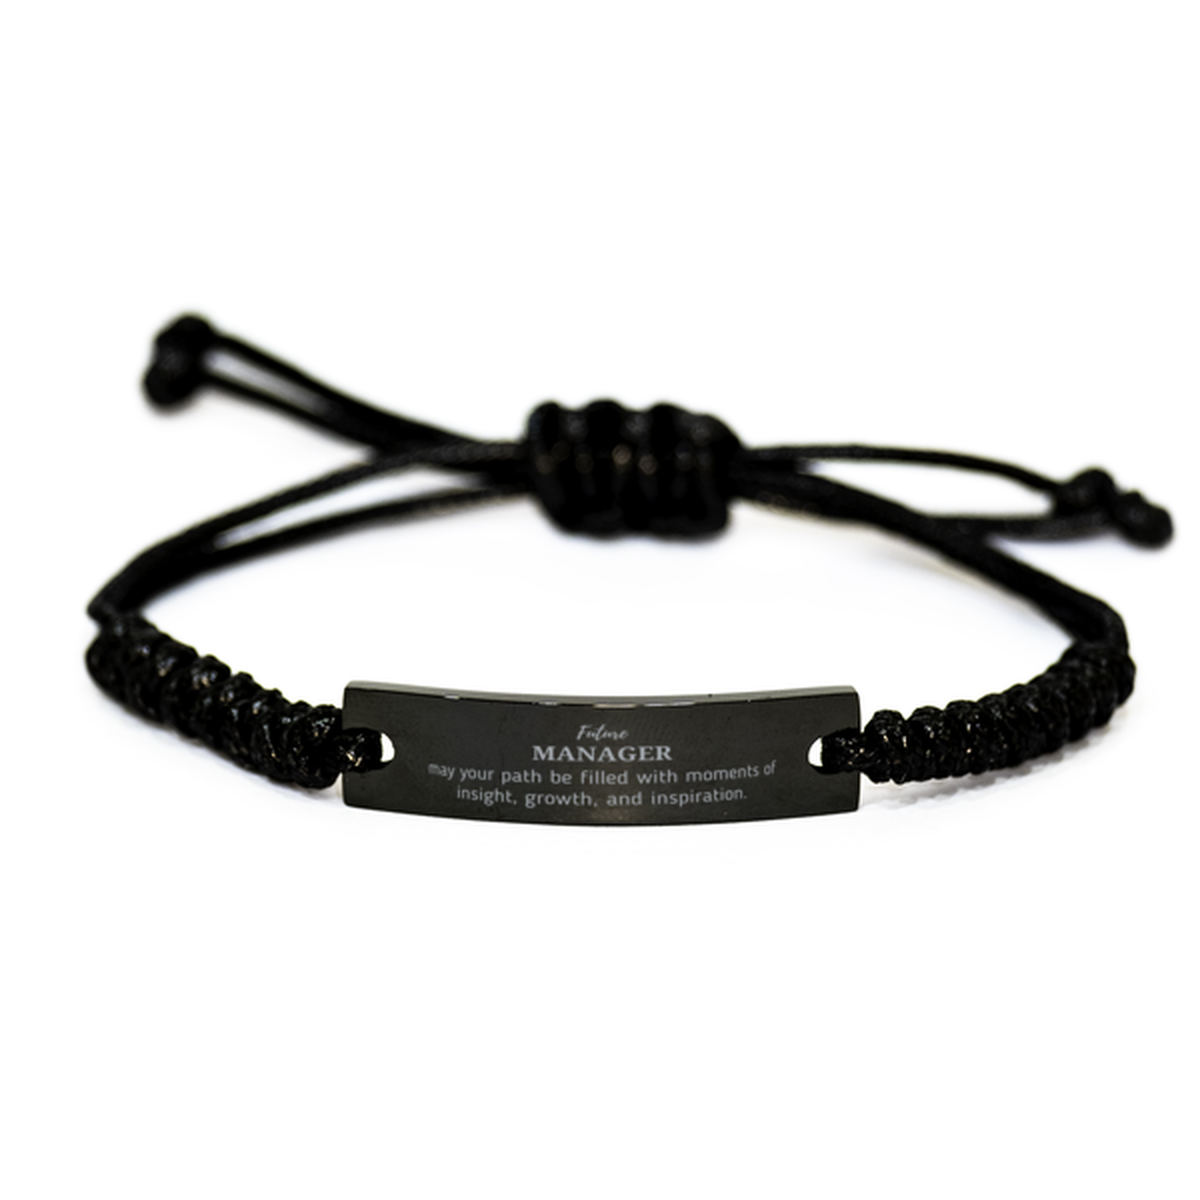 Future Manager Gifts, May your path be filled with moments of insight, Graduation Gifts for New Manager, Christmas Unique Black Rope Bracelet For Men, Women, Friends